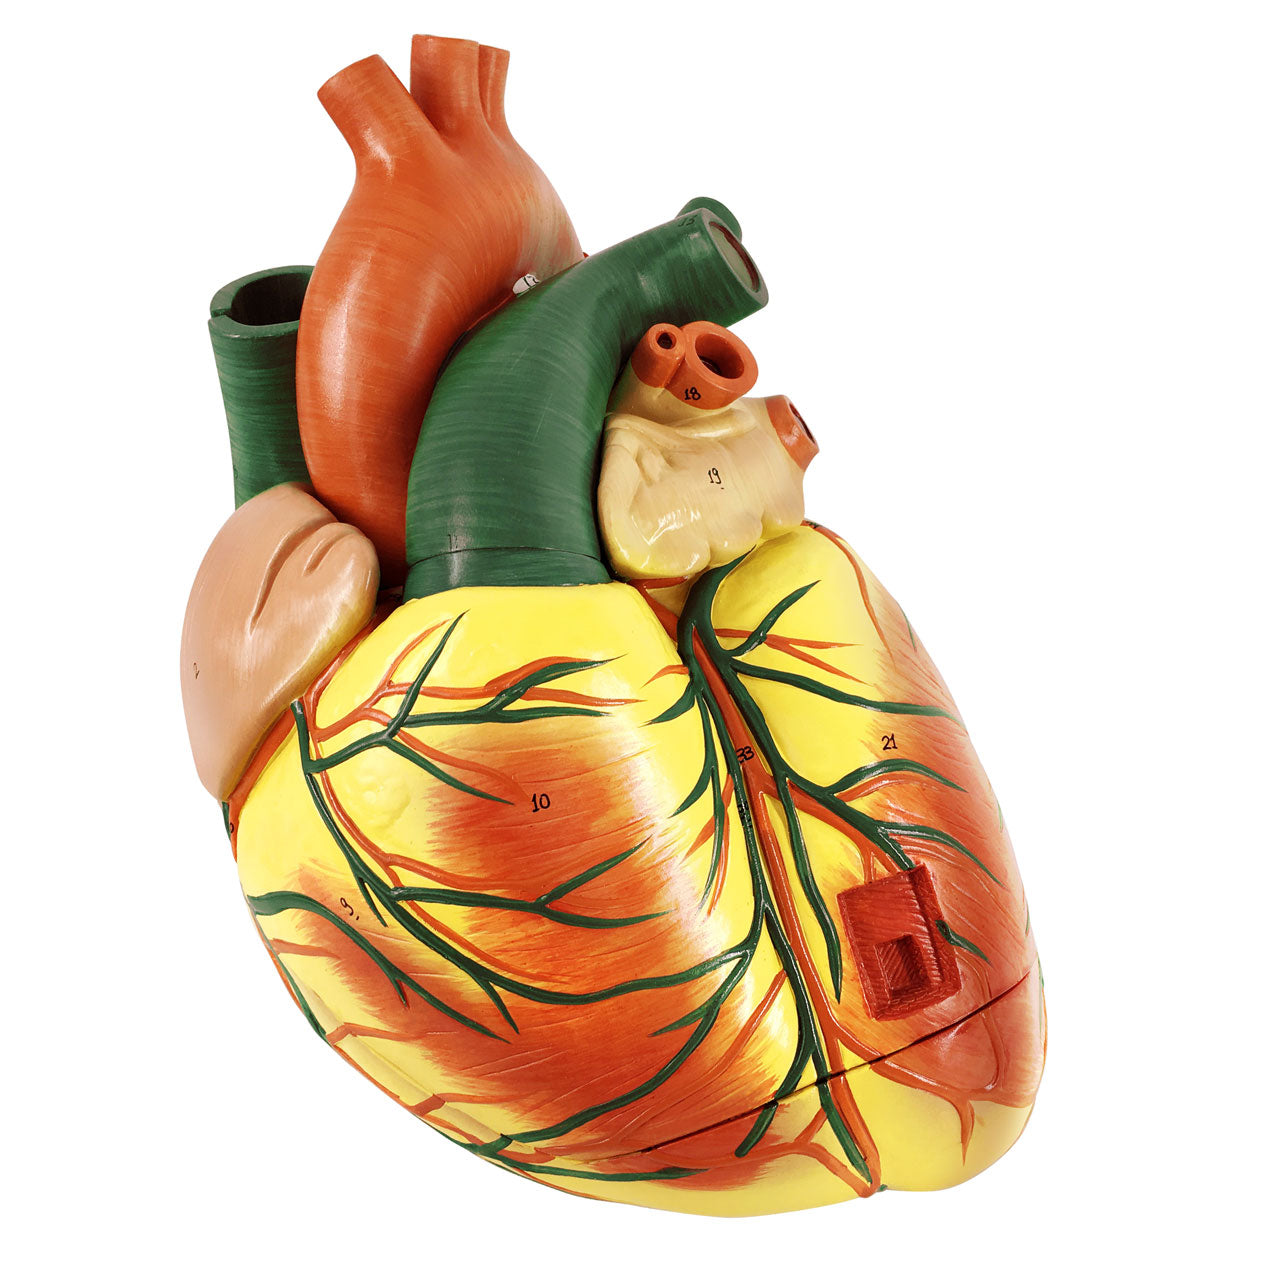 Evotech Scientific Large Human Heart Model 3x Life-Size Numbered Anatomical Heart